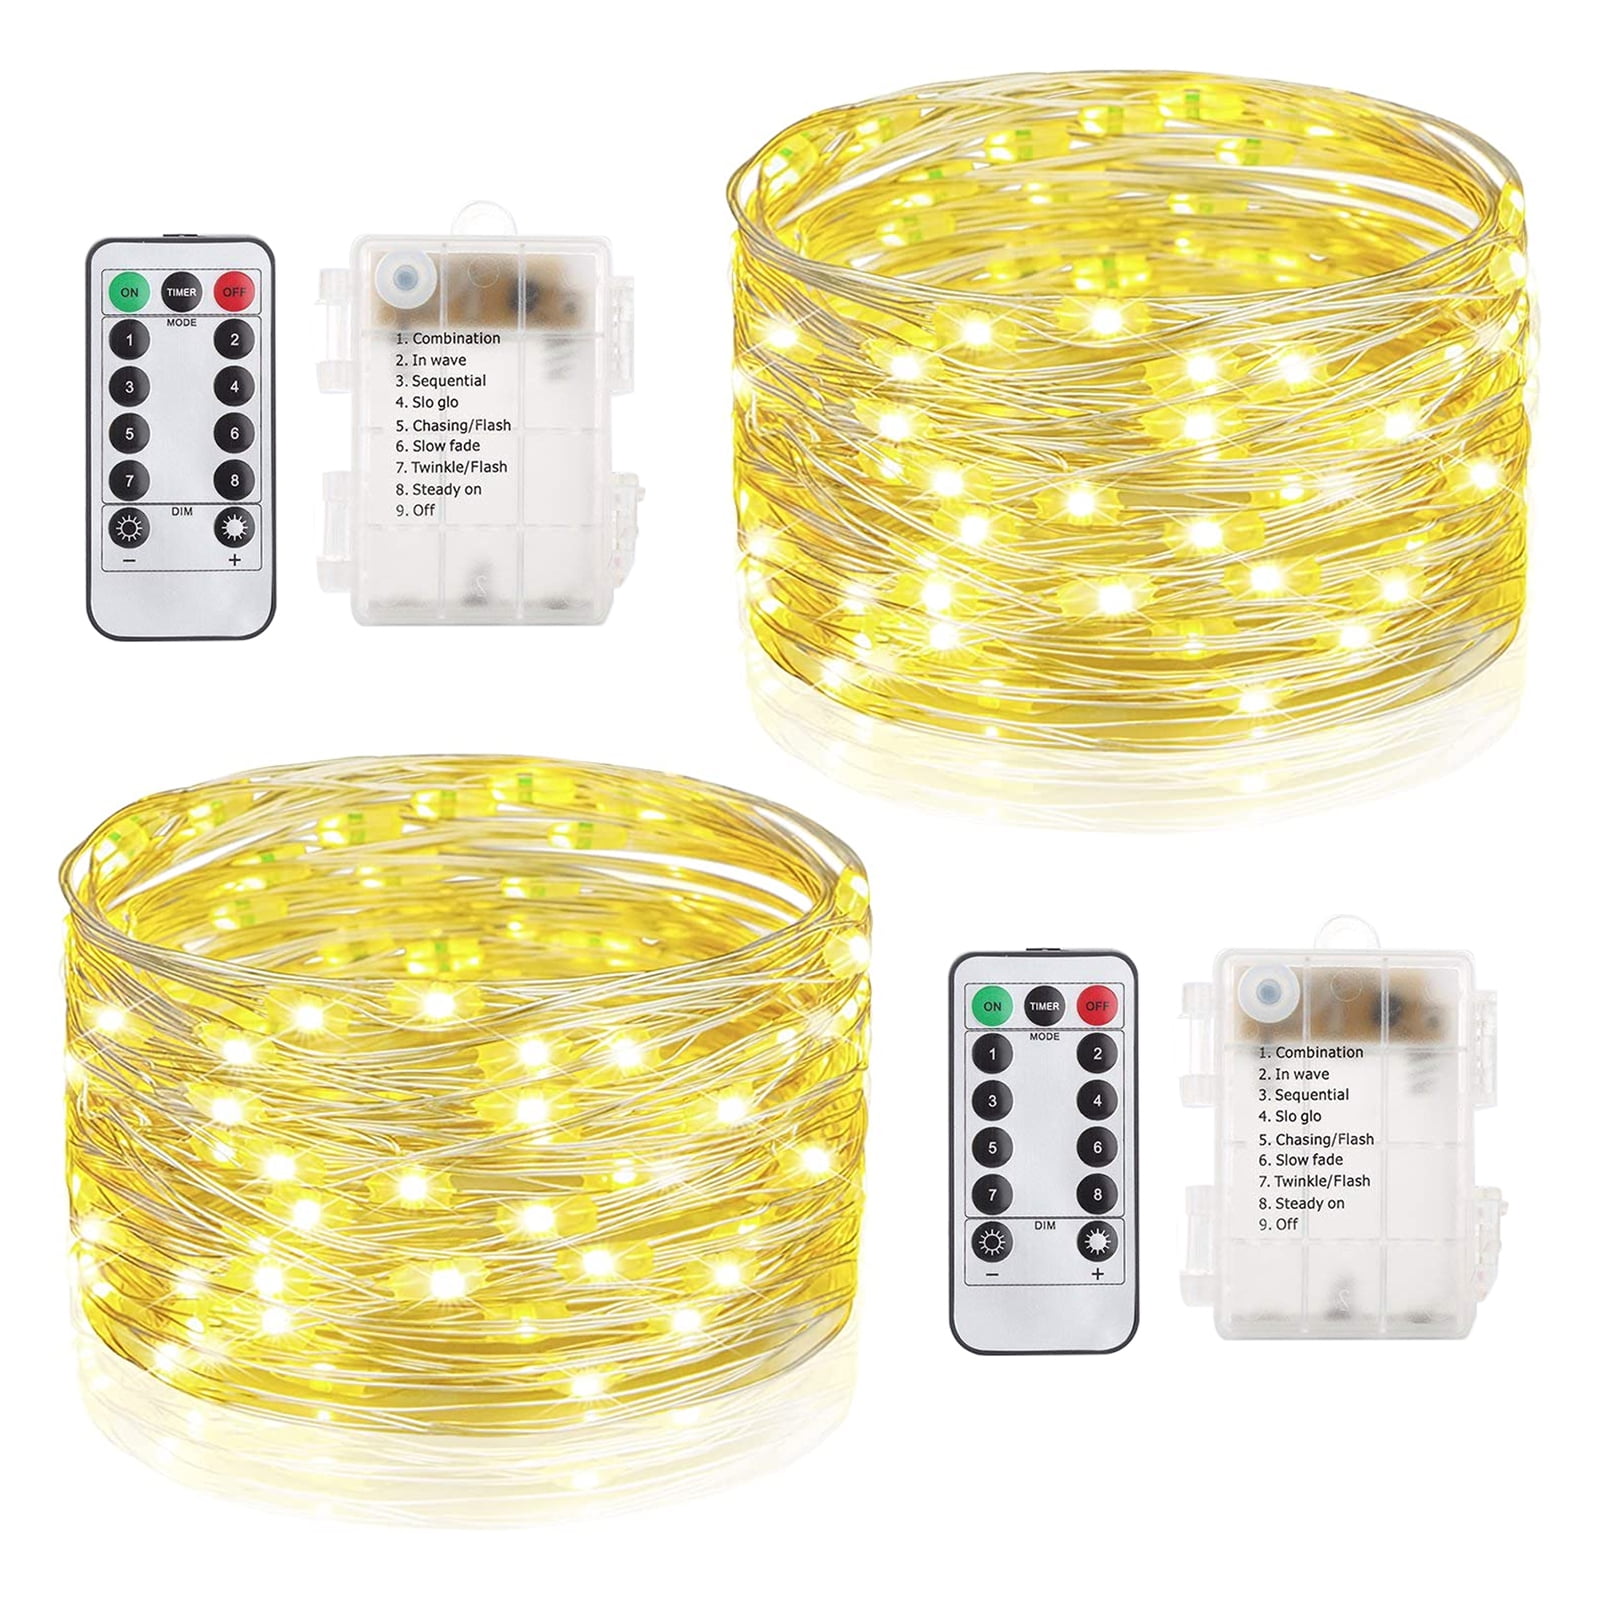 2 Set Fairy Lights Battery Operated - Led String Lights 8 Modes 66Ft 200 LED Starry Lights - Silver Wire Firefly Lights for Wedding Birthday Party Christmas Decoration - Warm White